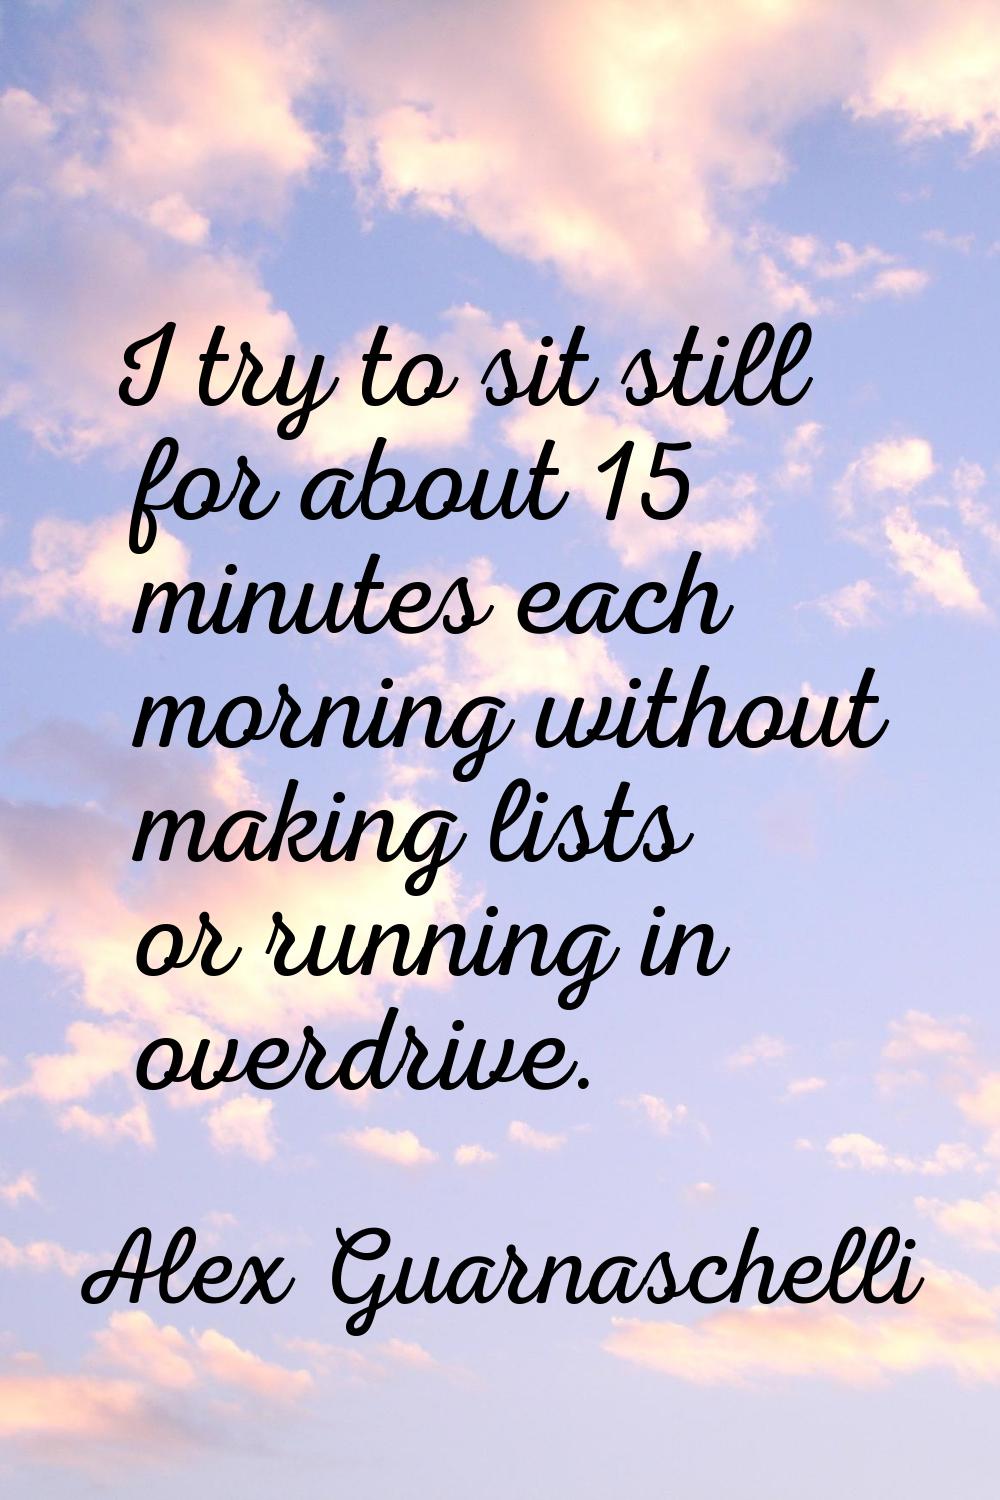 I try to sit still for about 15 minutes each morning without making lists or running in overdrive.